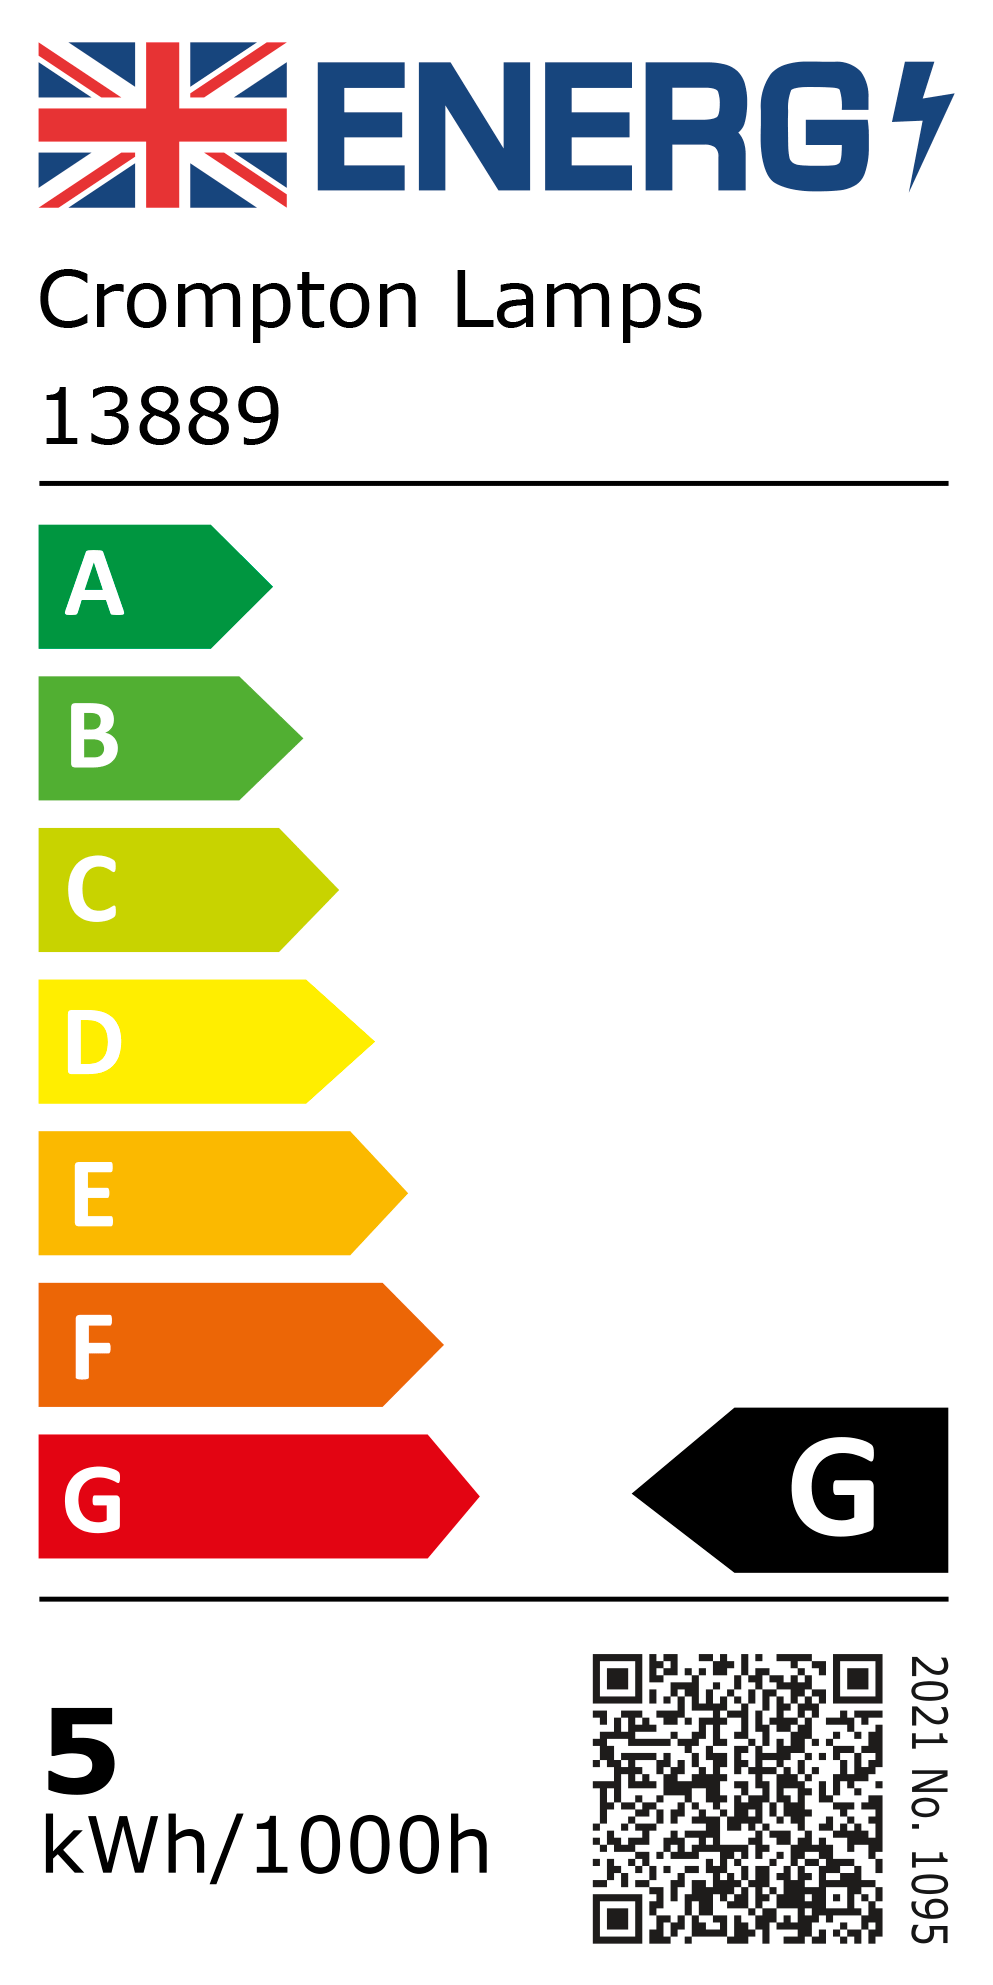 New 2021 Energy Rating Label: Stock Code 13889